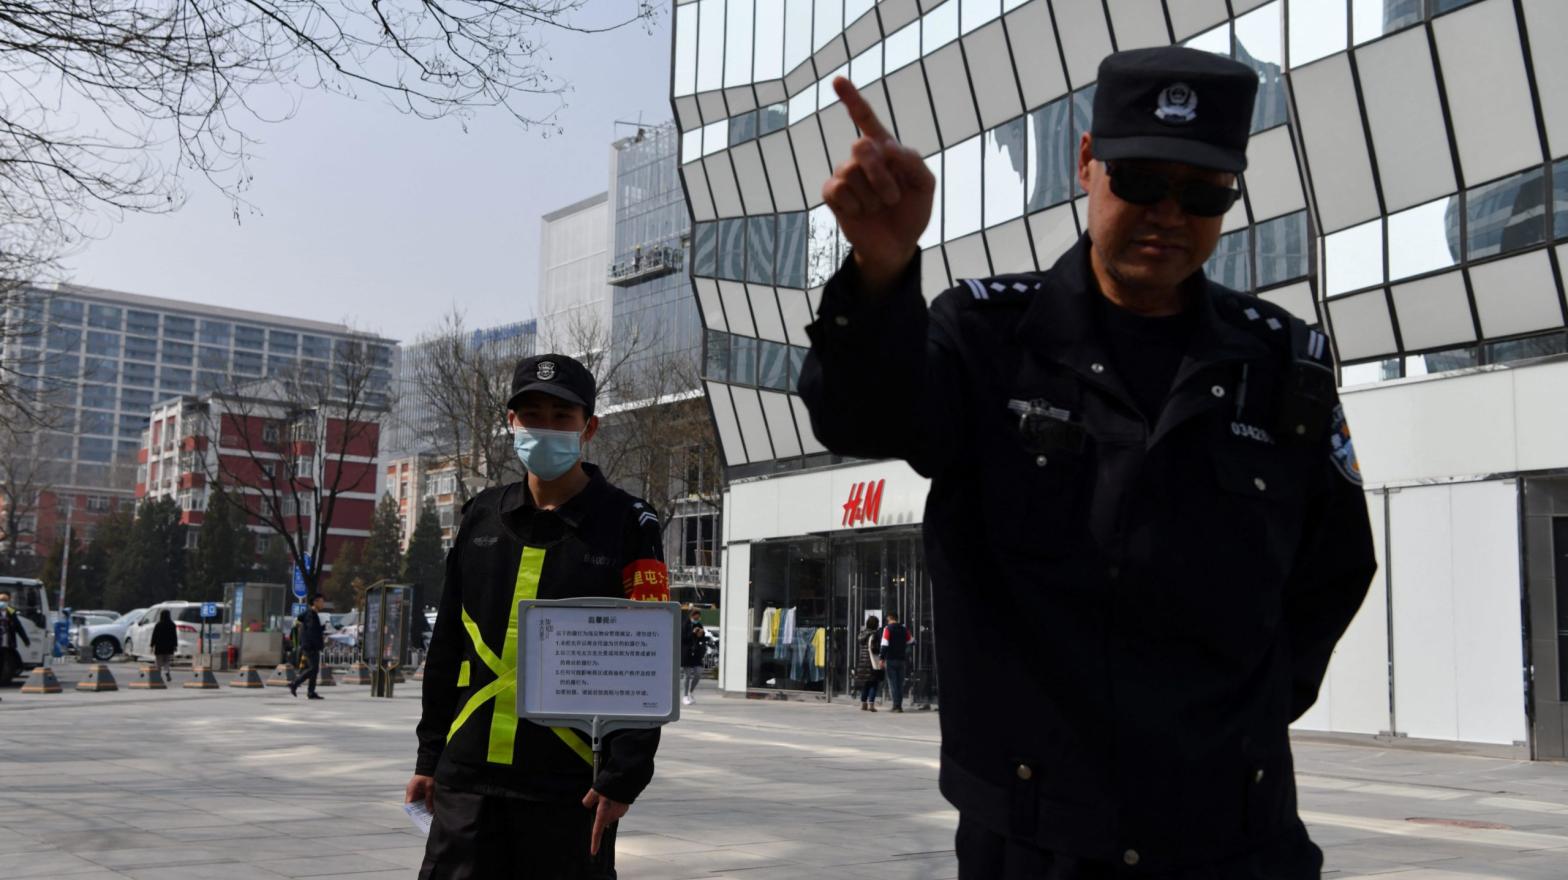 A cop tries to prevent photos from being taken outside an H&M store in Beijing on March 25, 2021. (Photo: Greg Baker/AFP, Getty Images)